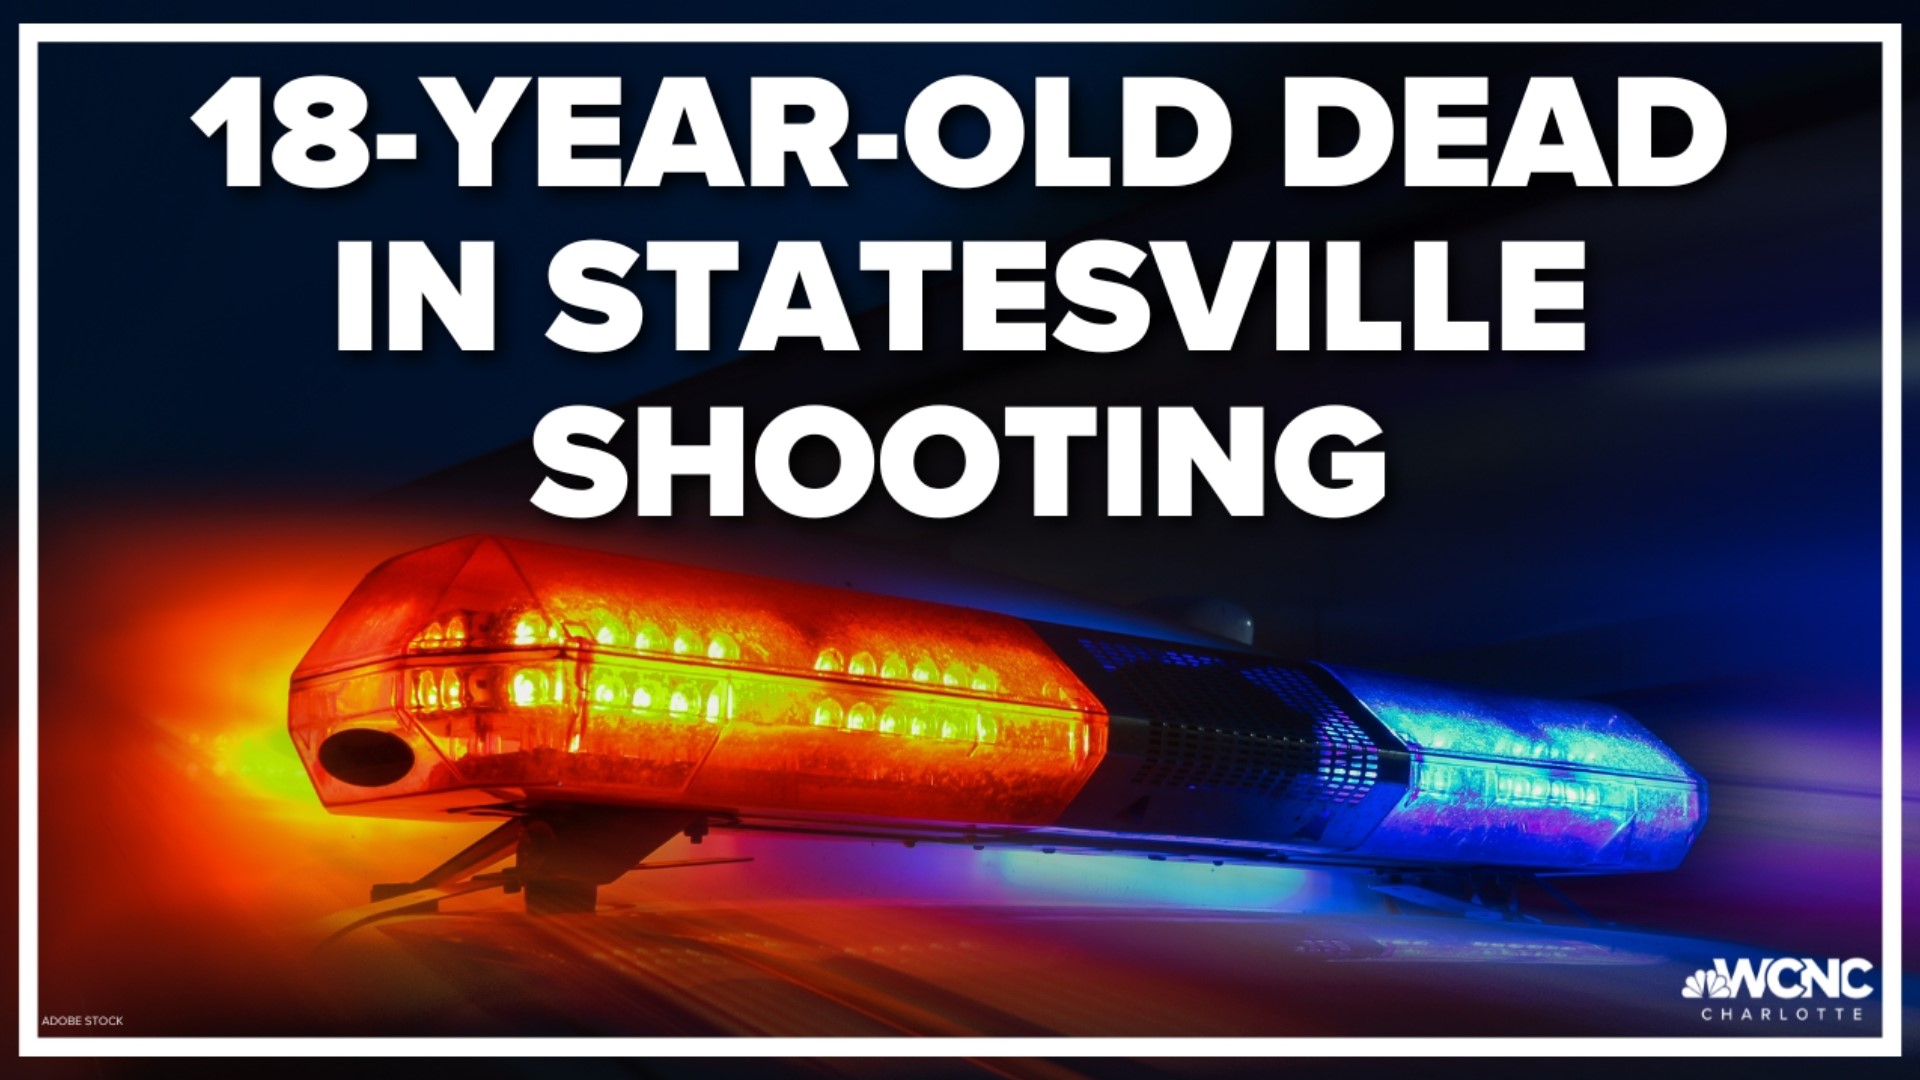 Statesville Police are investigating a deadly shooting. They say two people were shot on Fifth Street and Newbern Avenue early Monday morning.